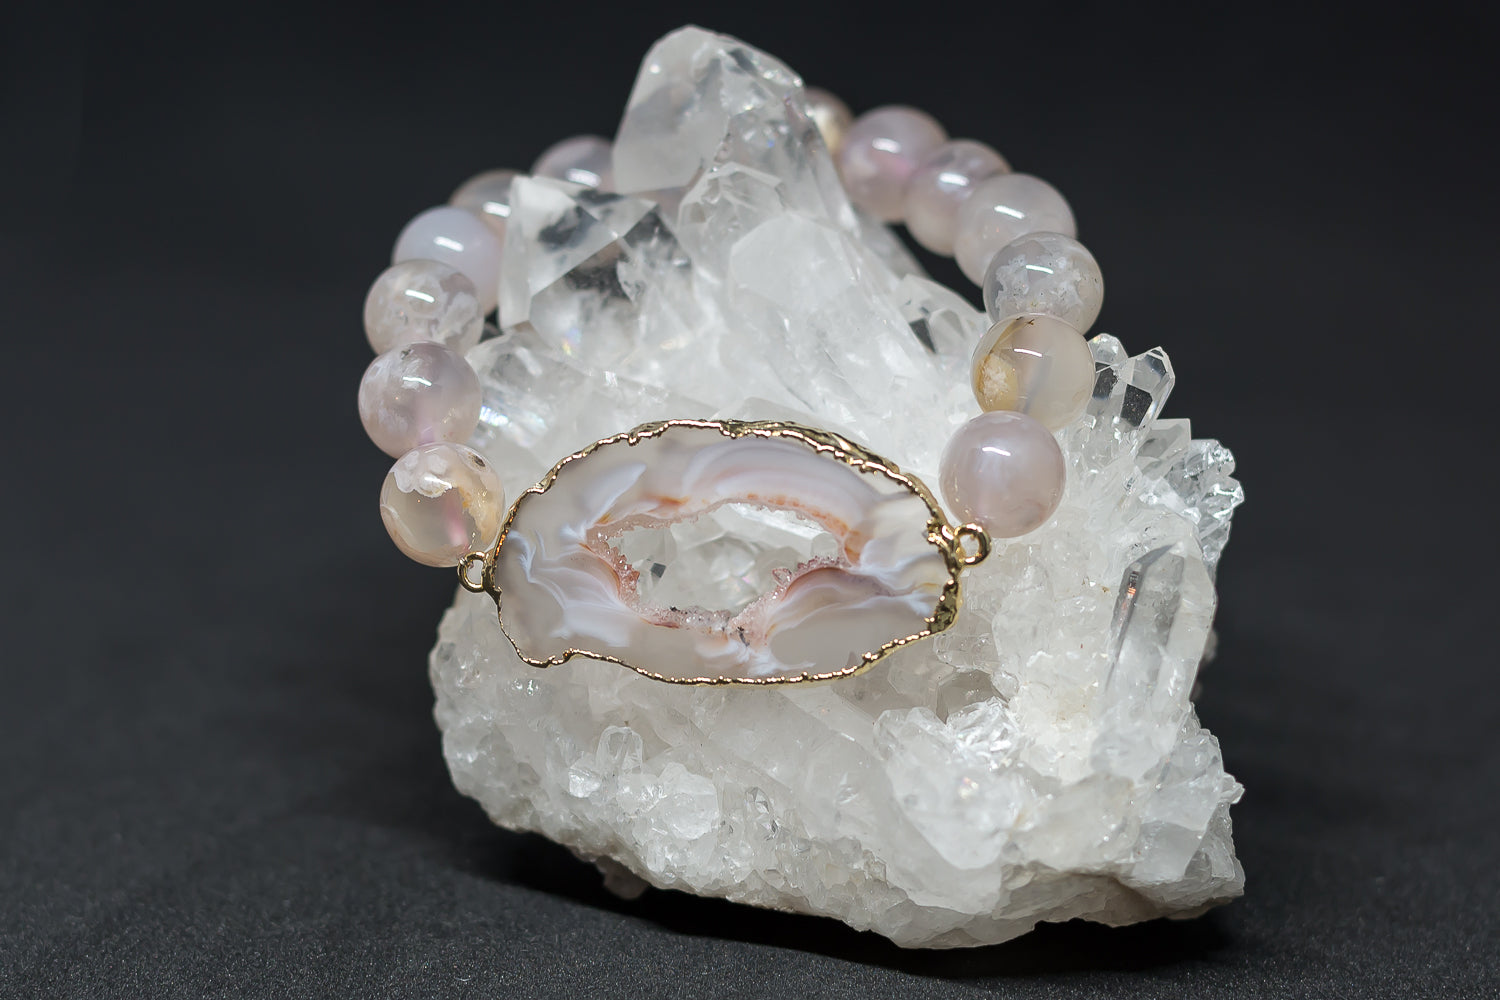 Flower Agate Stretchy Bracelet with Druzy Agate Oco Geode Slice Electroplated in Gold